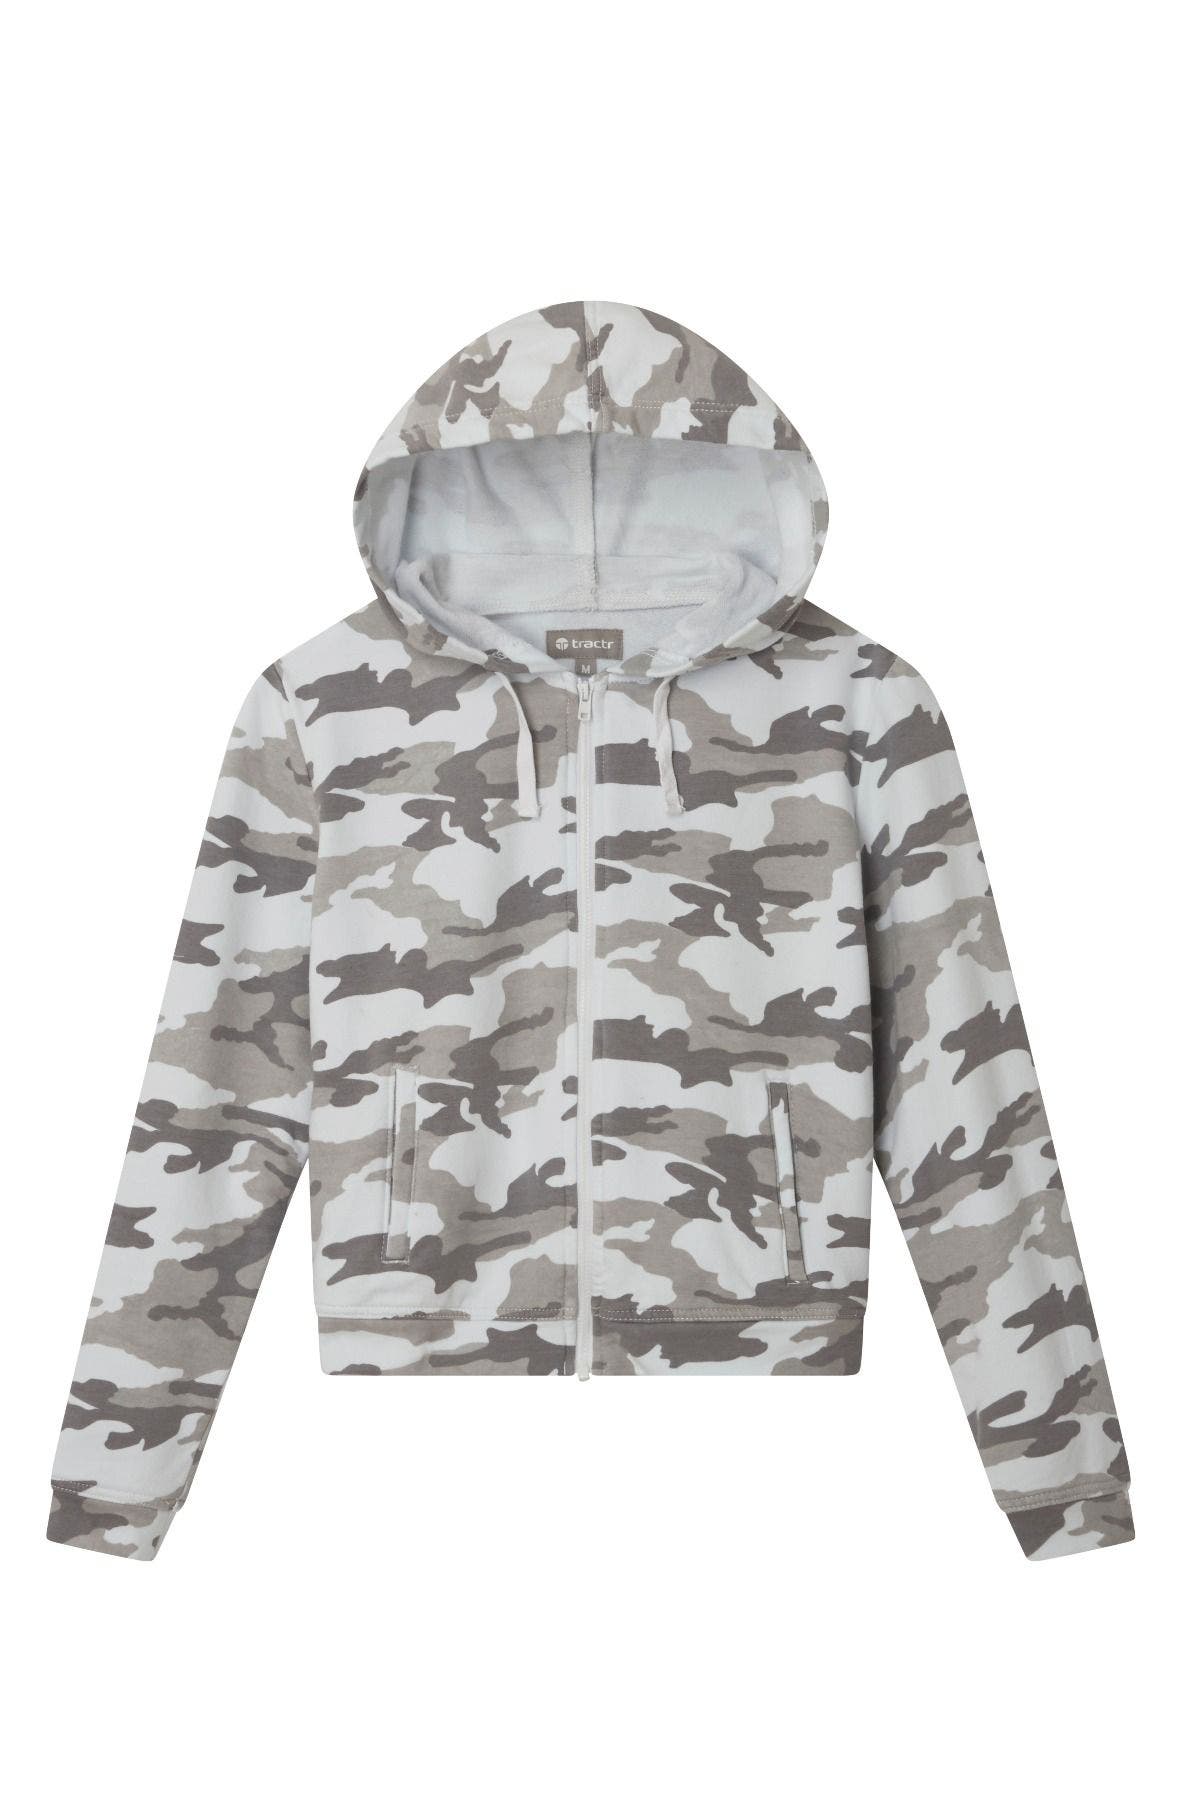 Patched Camo Print Zip Up Hoody - Twinkle Twinkle Little One